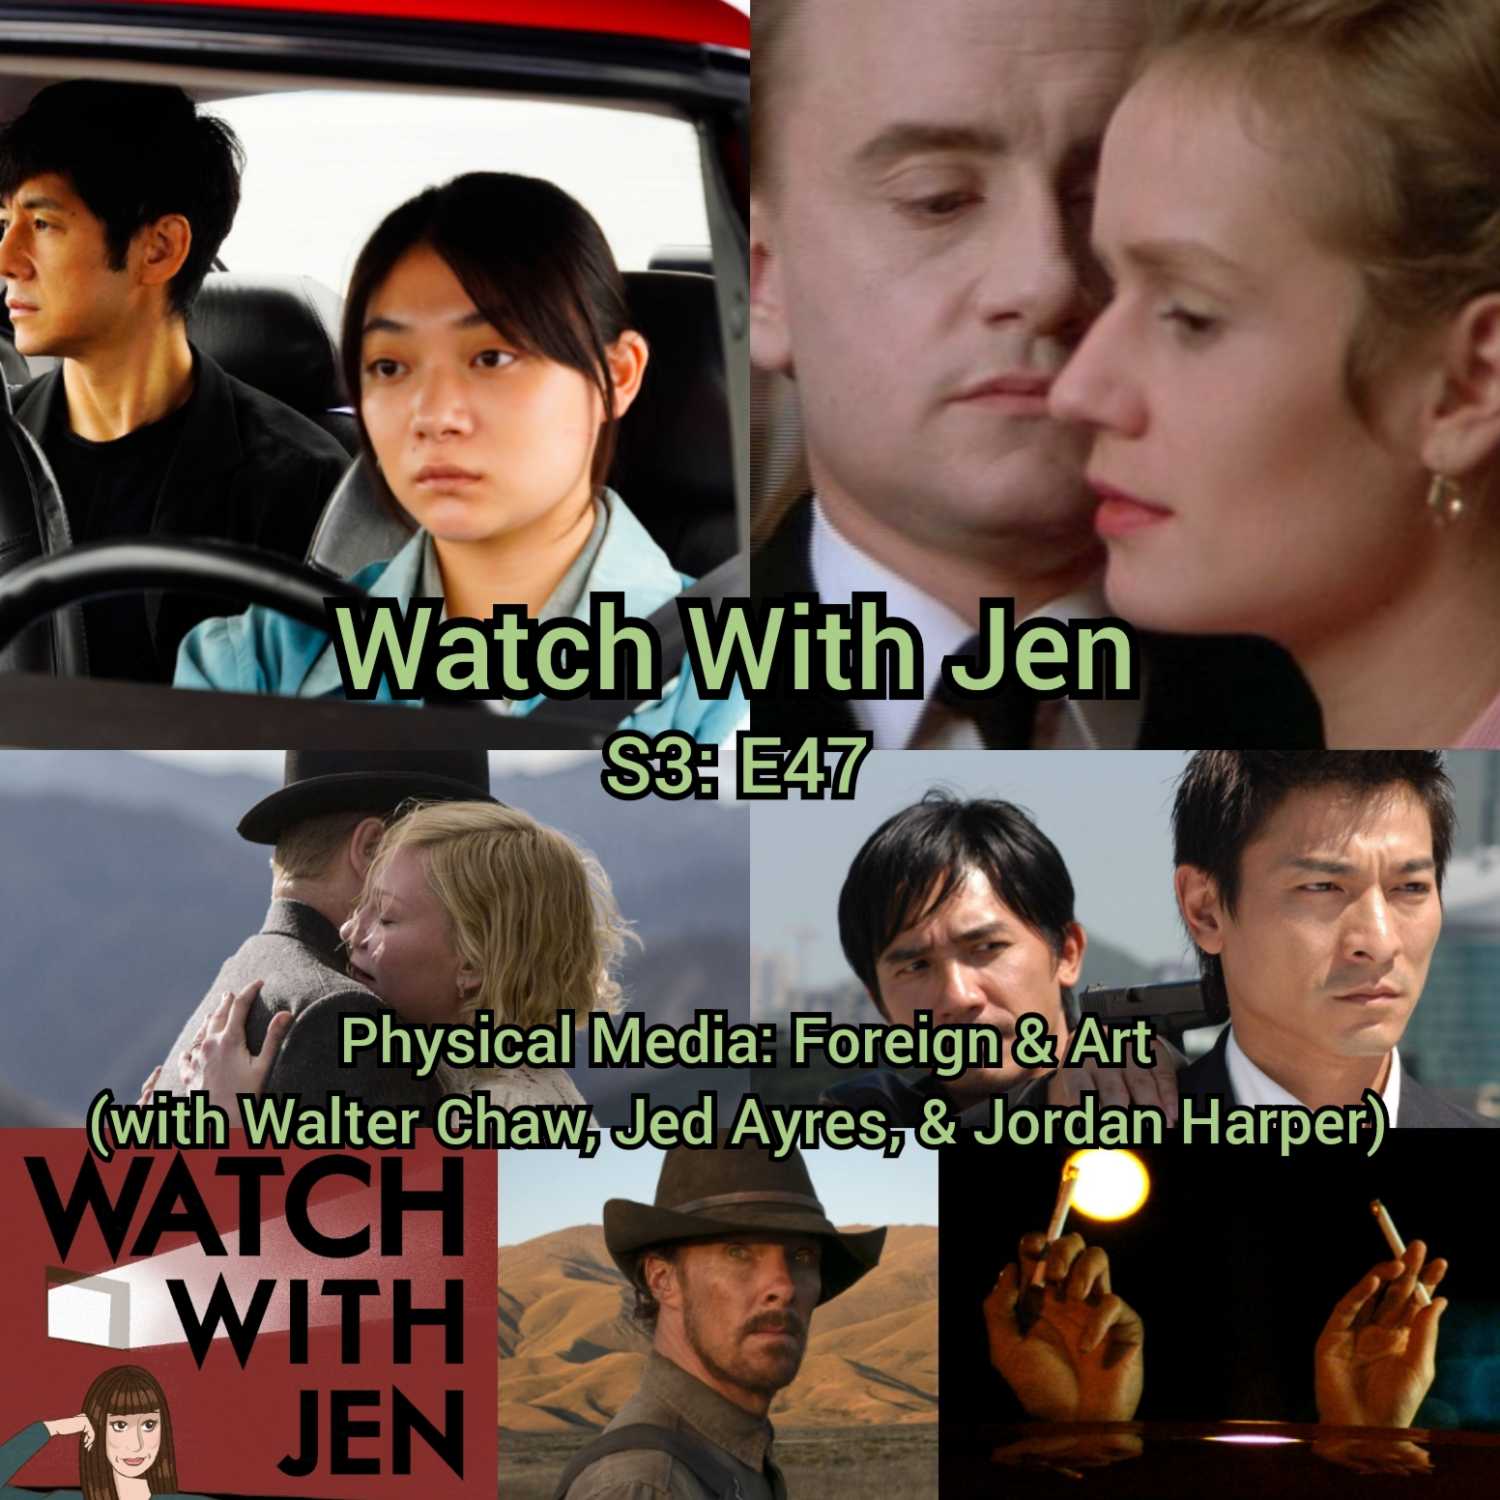 Watch With Jen - S3: E47 - Physical Media: Foreign & Art (with Walter Chaw, Jed Ayres, & Jordan Harper)